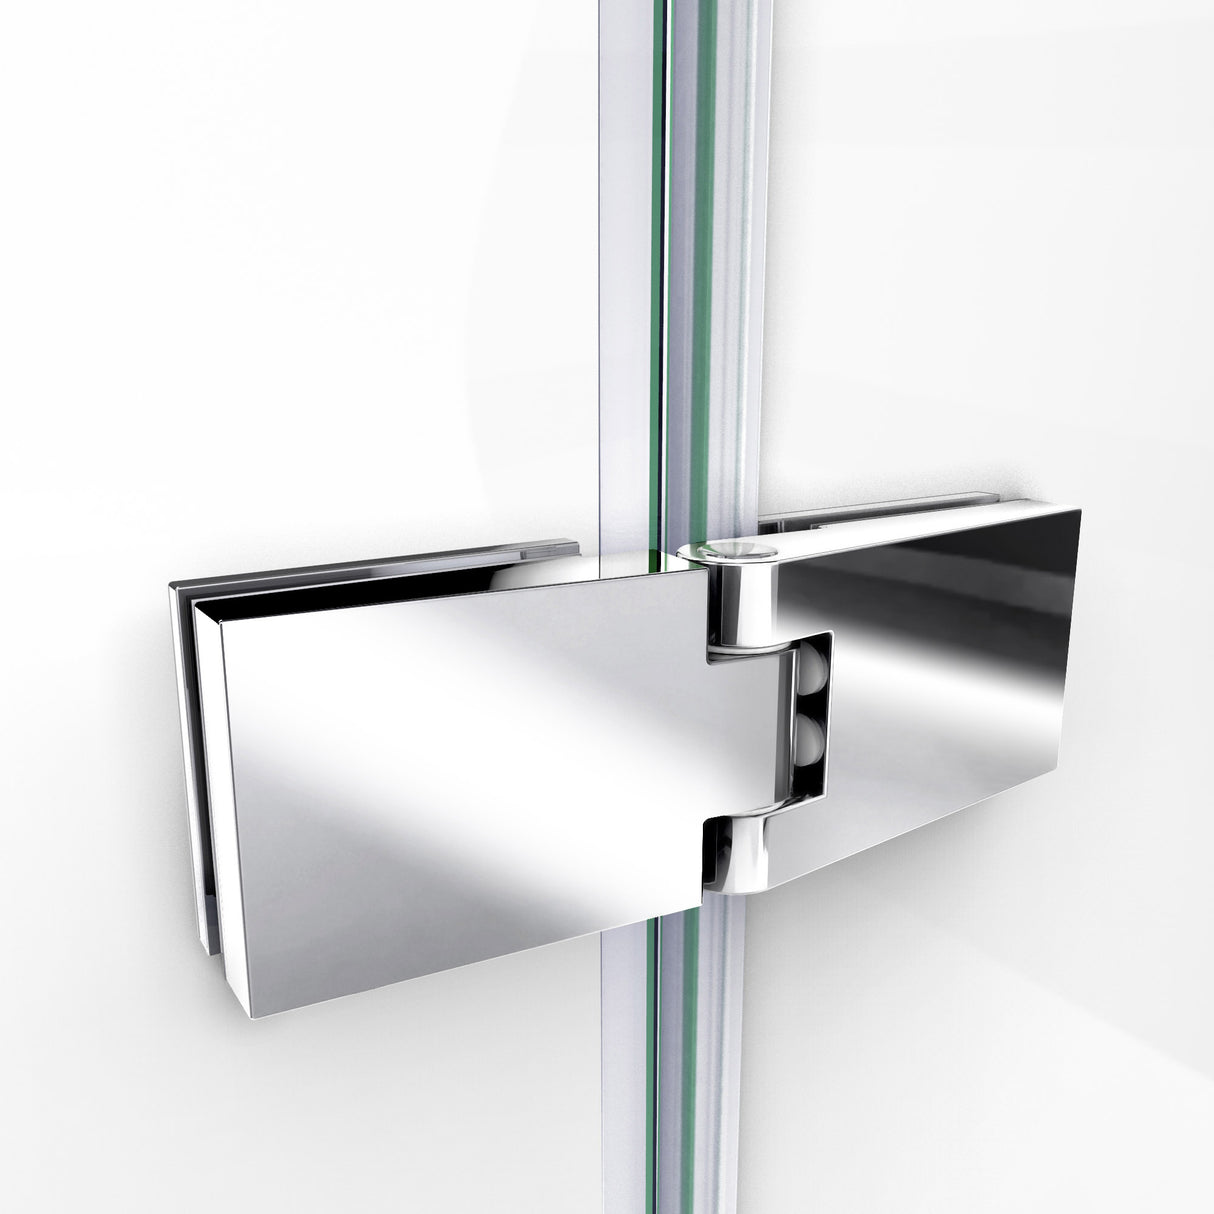 DreamLine Aqua Ultra 36 in. D x 60 in. W x 74 3/4 in. H Frameless Shower Door in Brushed Nickel and Center Drain Biscuit Base Kit